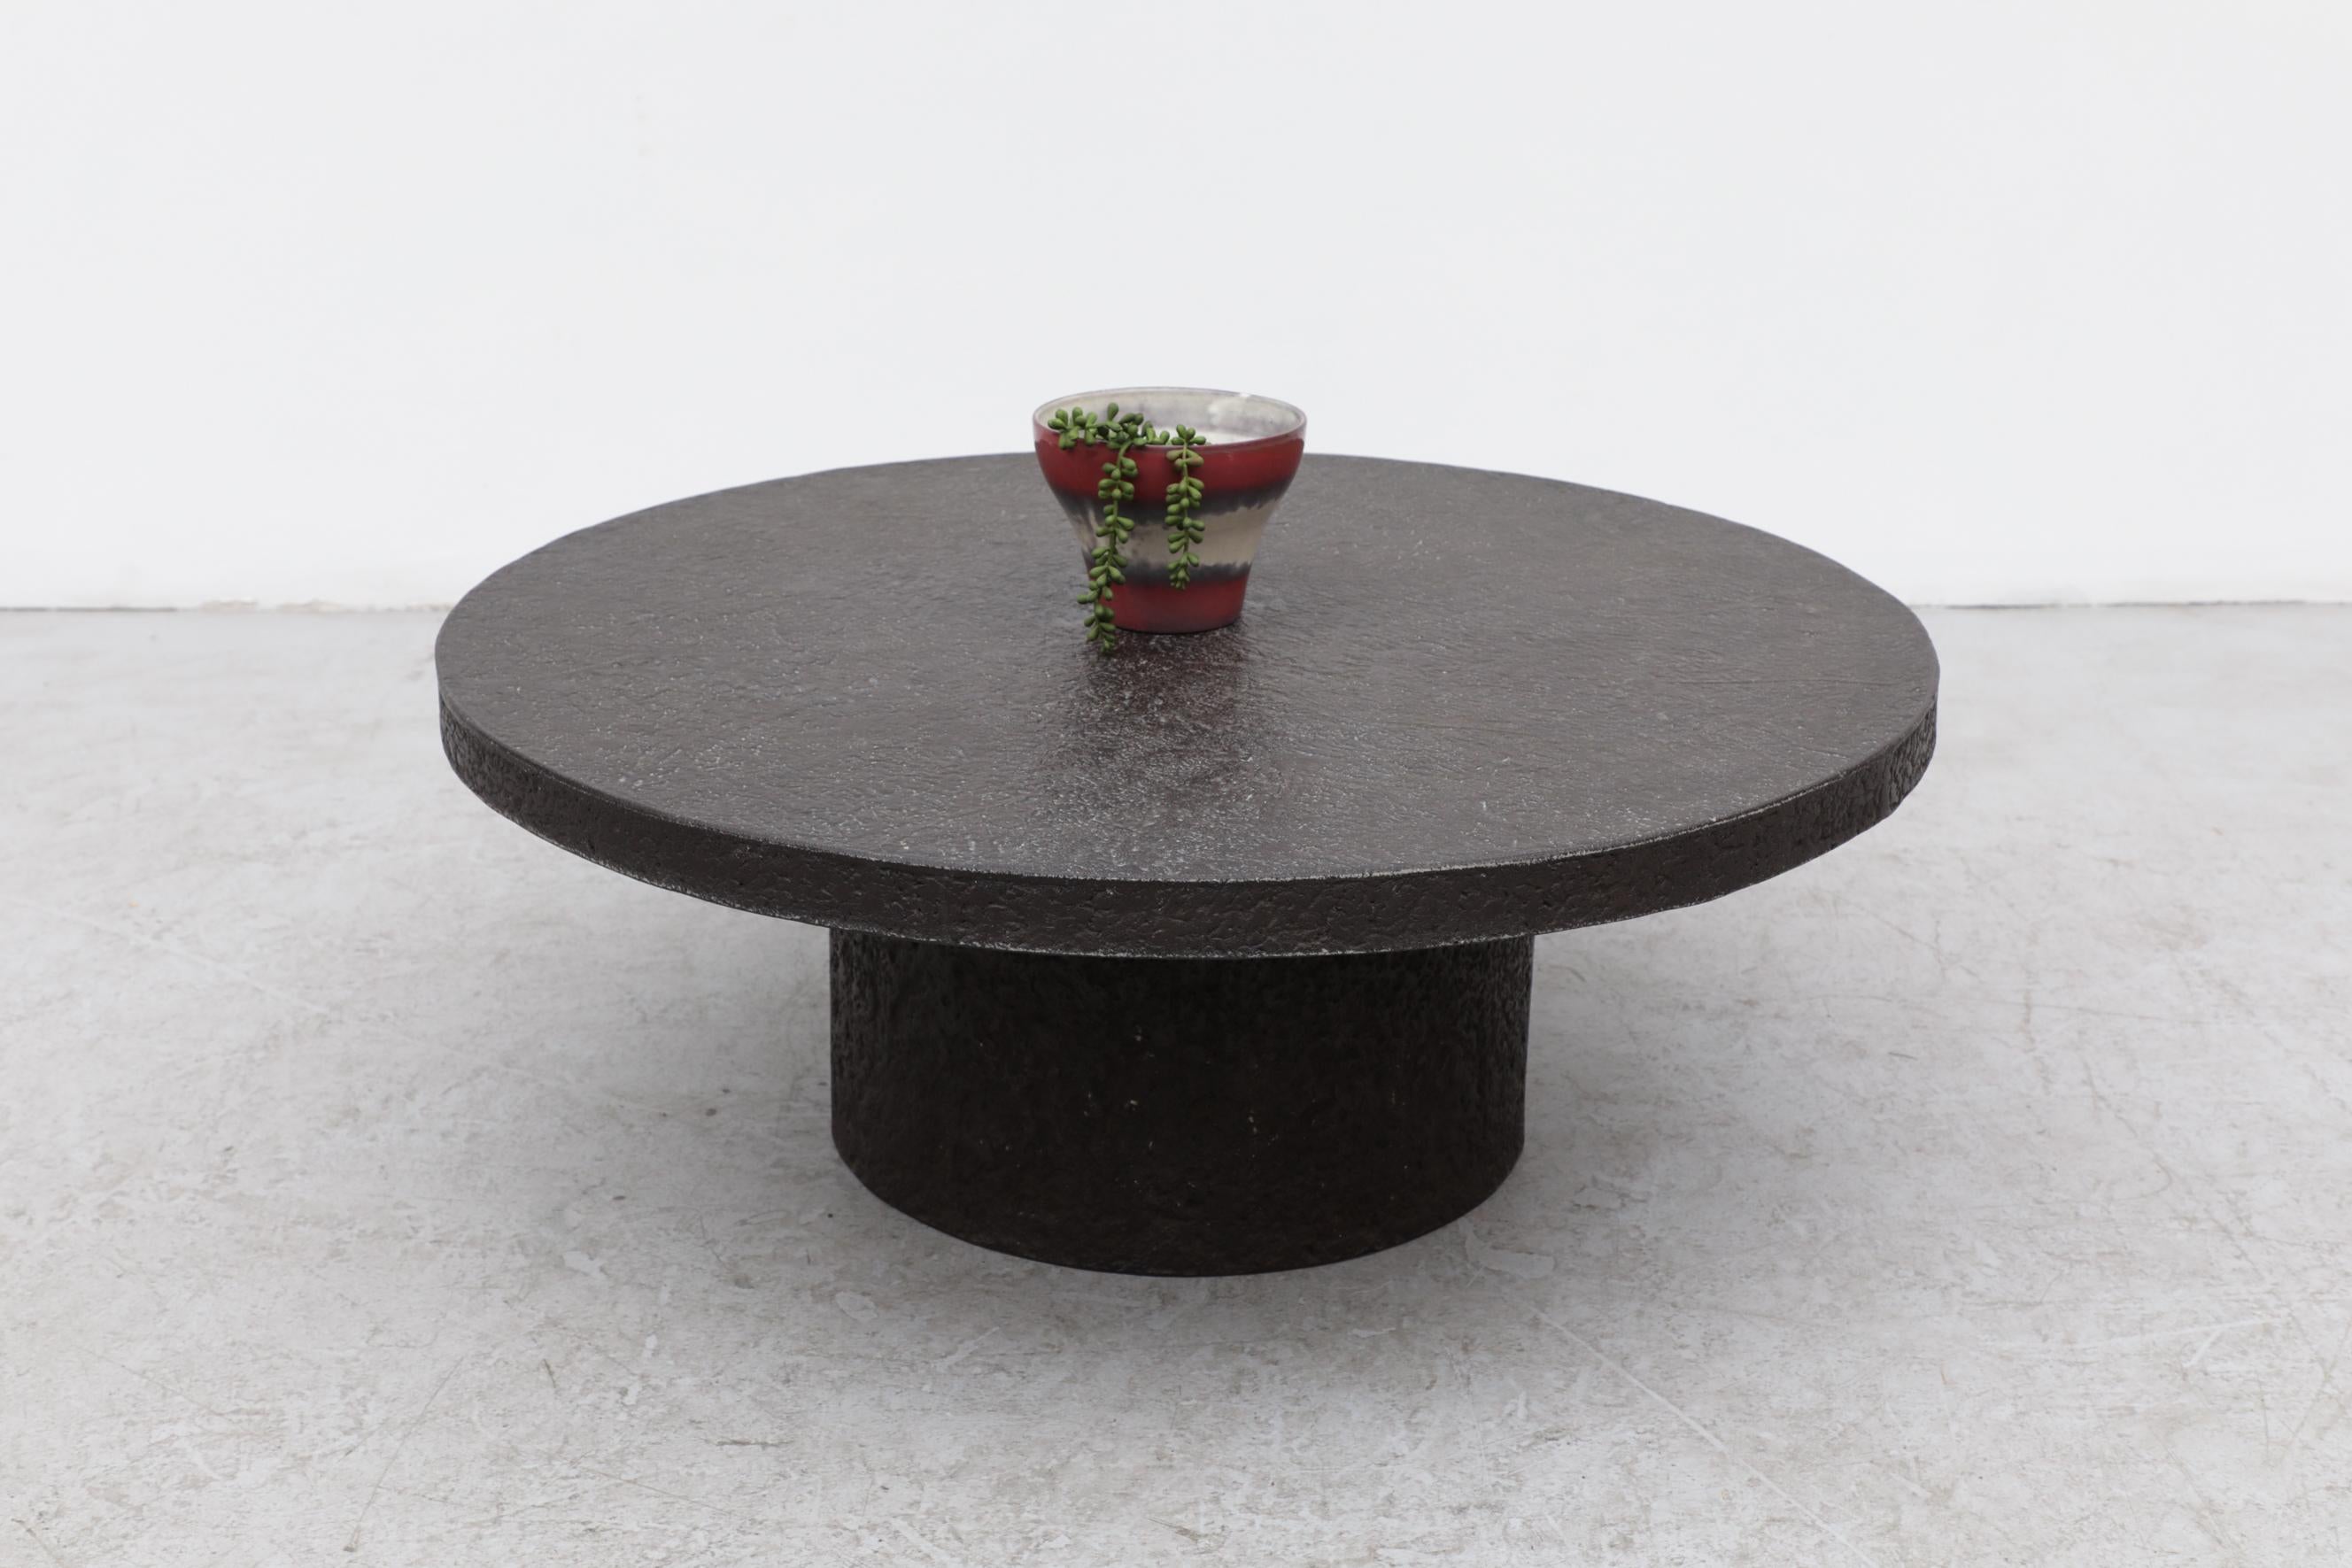 Dutch Brutalist Faux Lava Stone Coffee Table with Pedestal Base